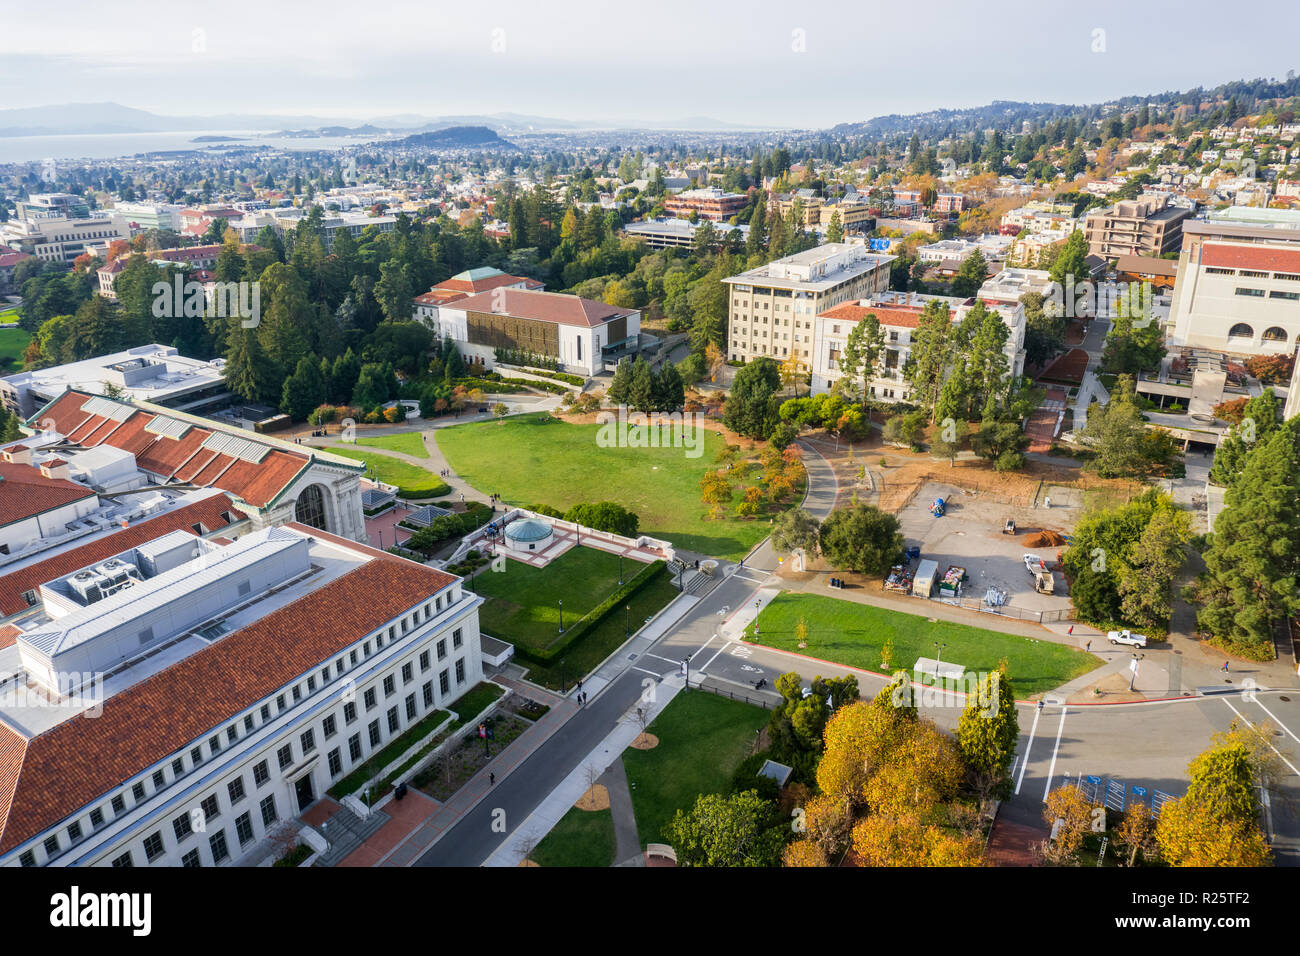 Aerial view of buildings in University of California, Berkeley campus on a sunny autumn day, view towards Richmond and the San Francisco bay shoreline Stock Photo